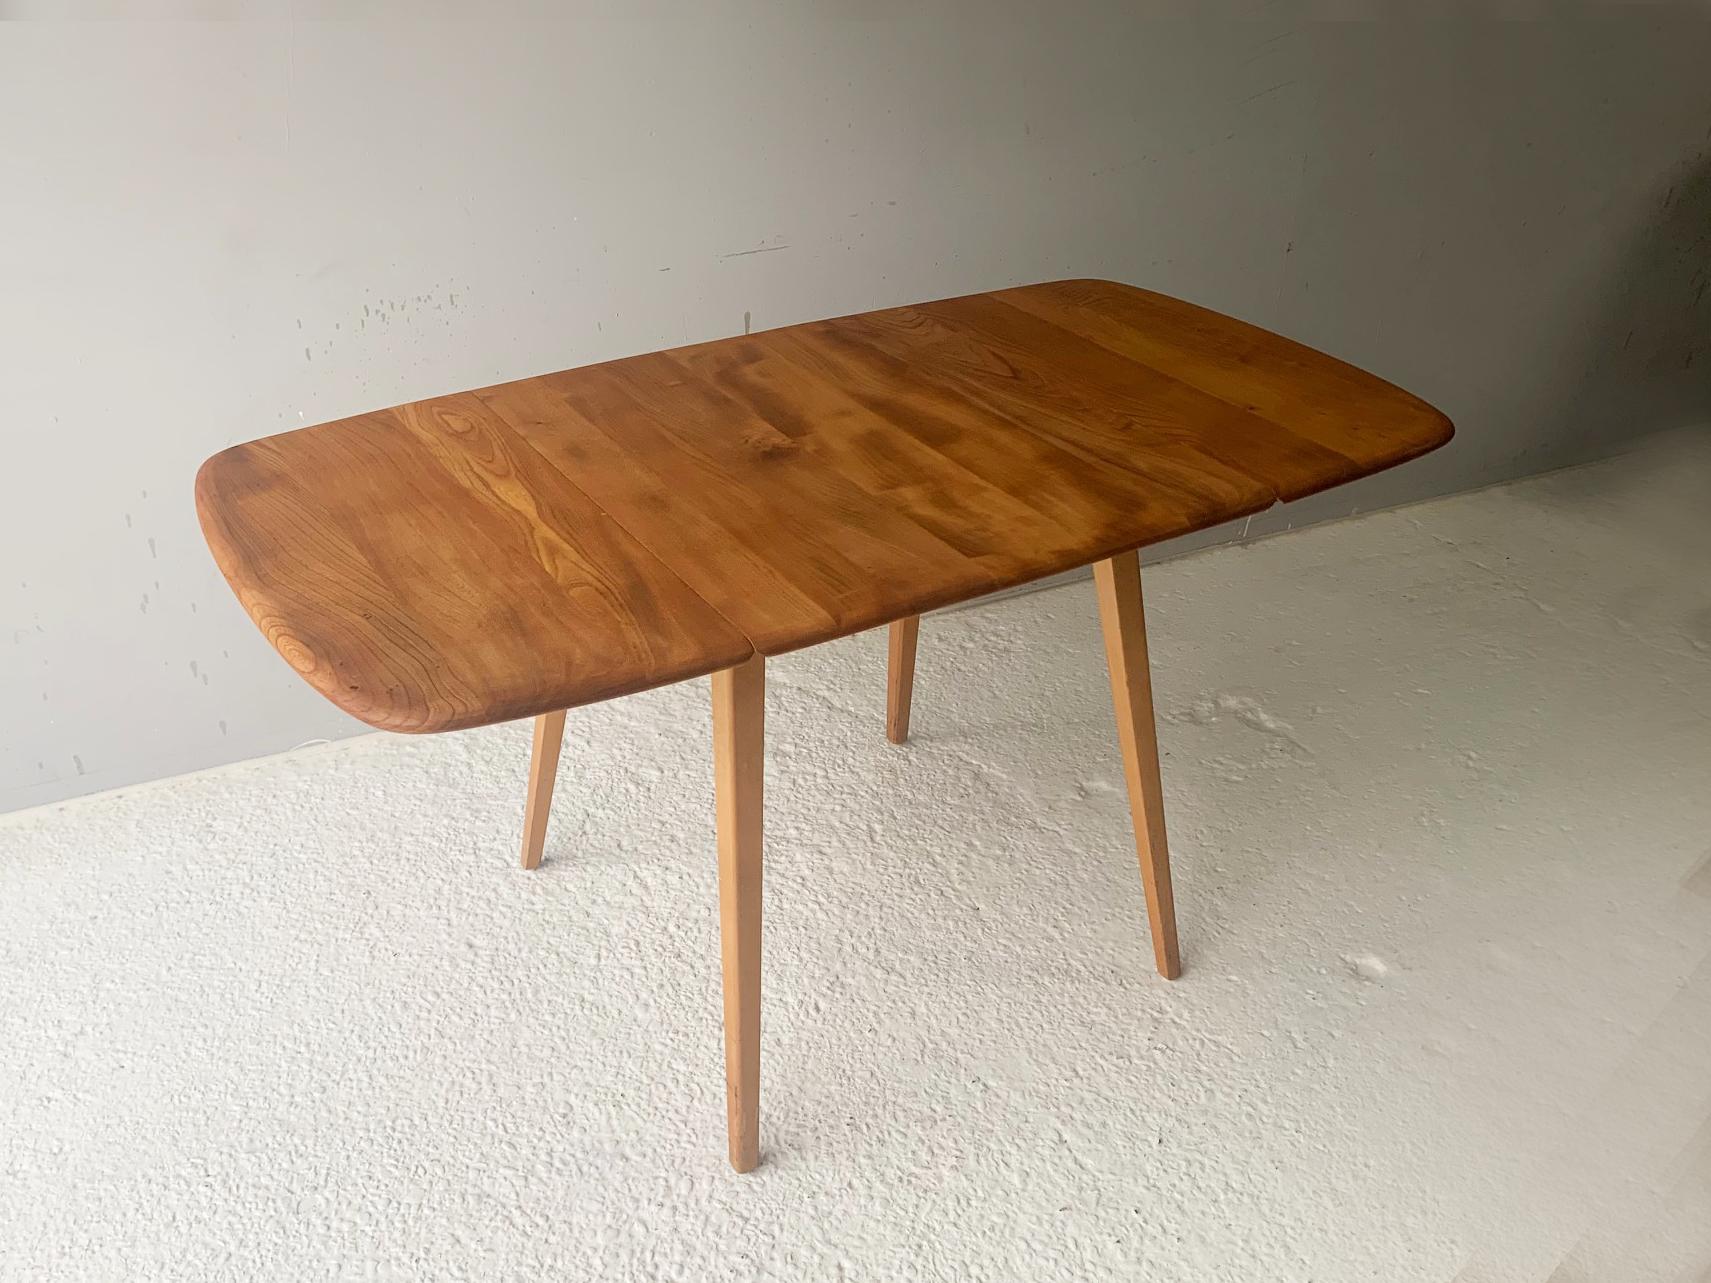 Vintage Ercol 492 dining table. Stylish design in solid elm and beech. Blue label dating back to the 1960’s. Beautiful vintage square dining table with spayed legs. Metal supports with wooden blocks at the end pull out from beneath the middle of the